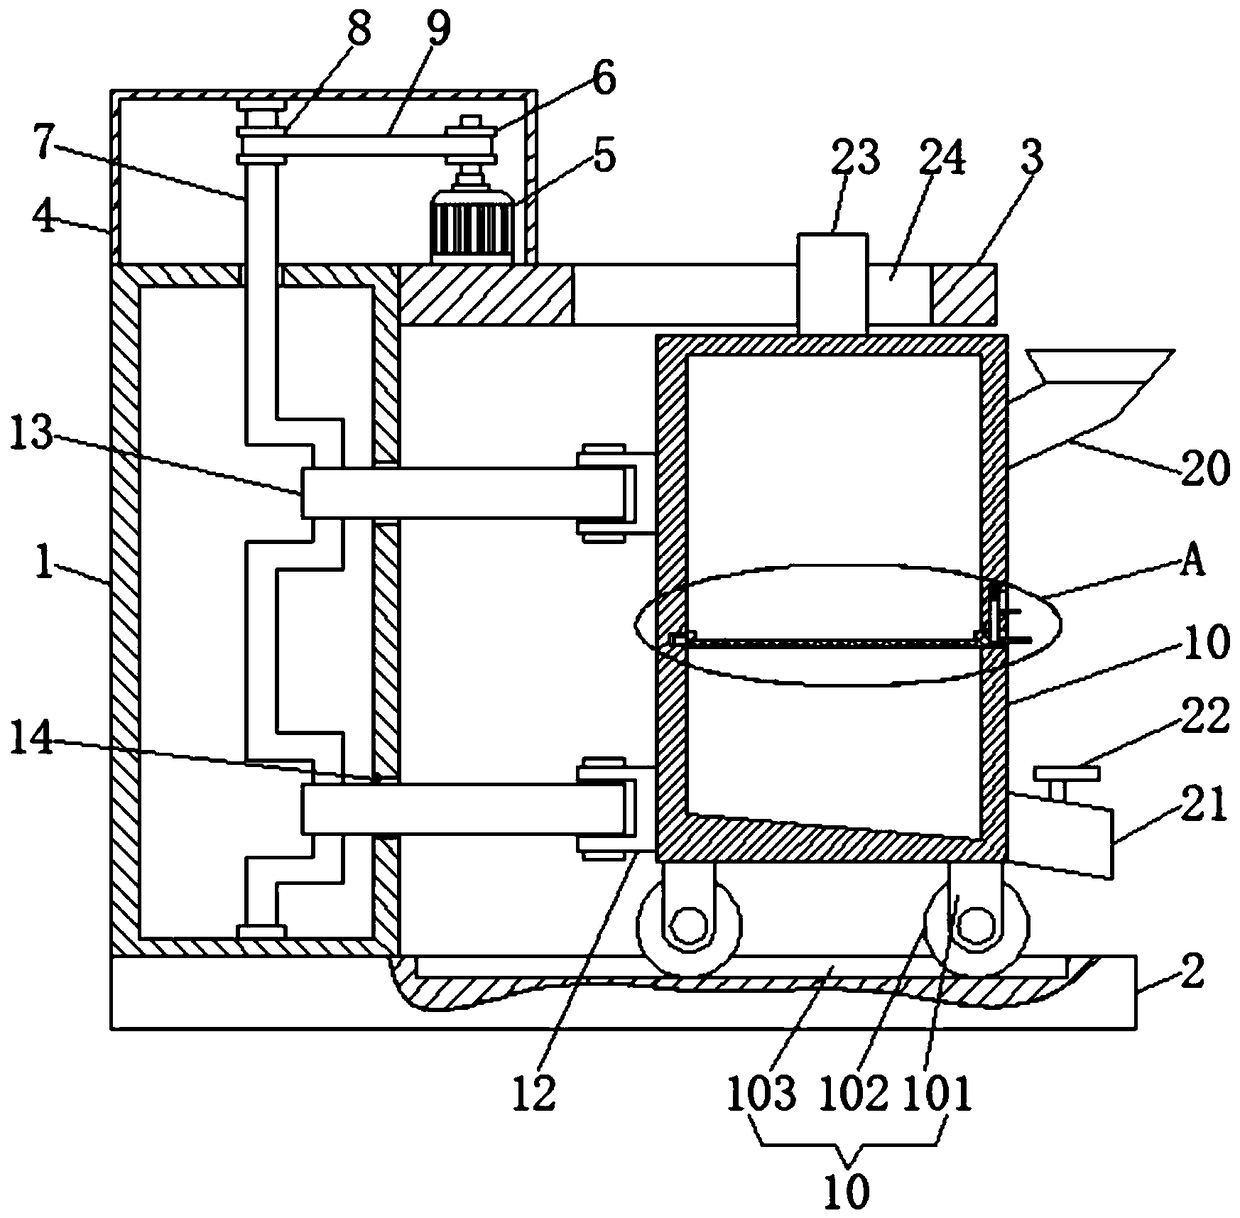 Screening device capable of automatically screening sand